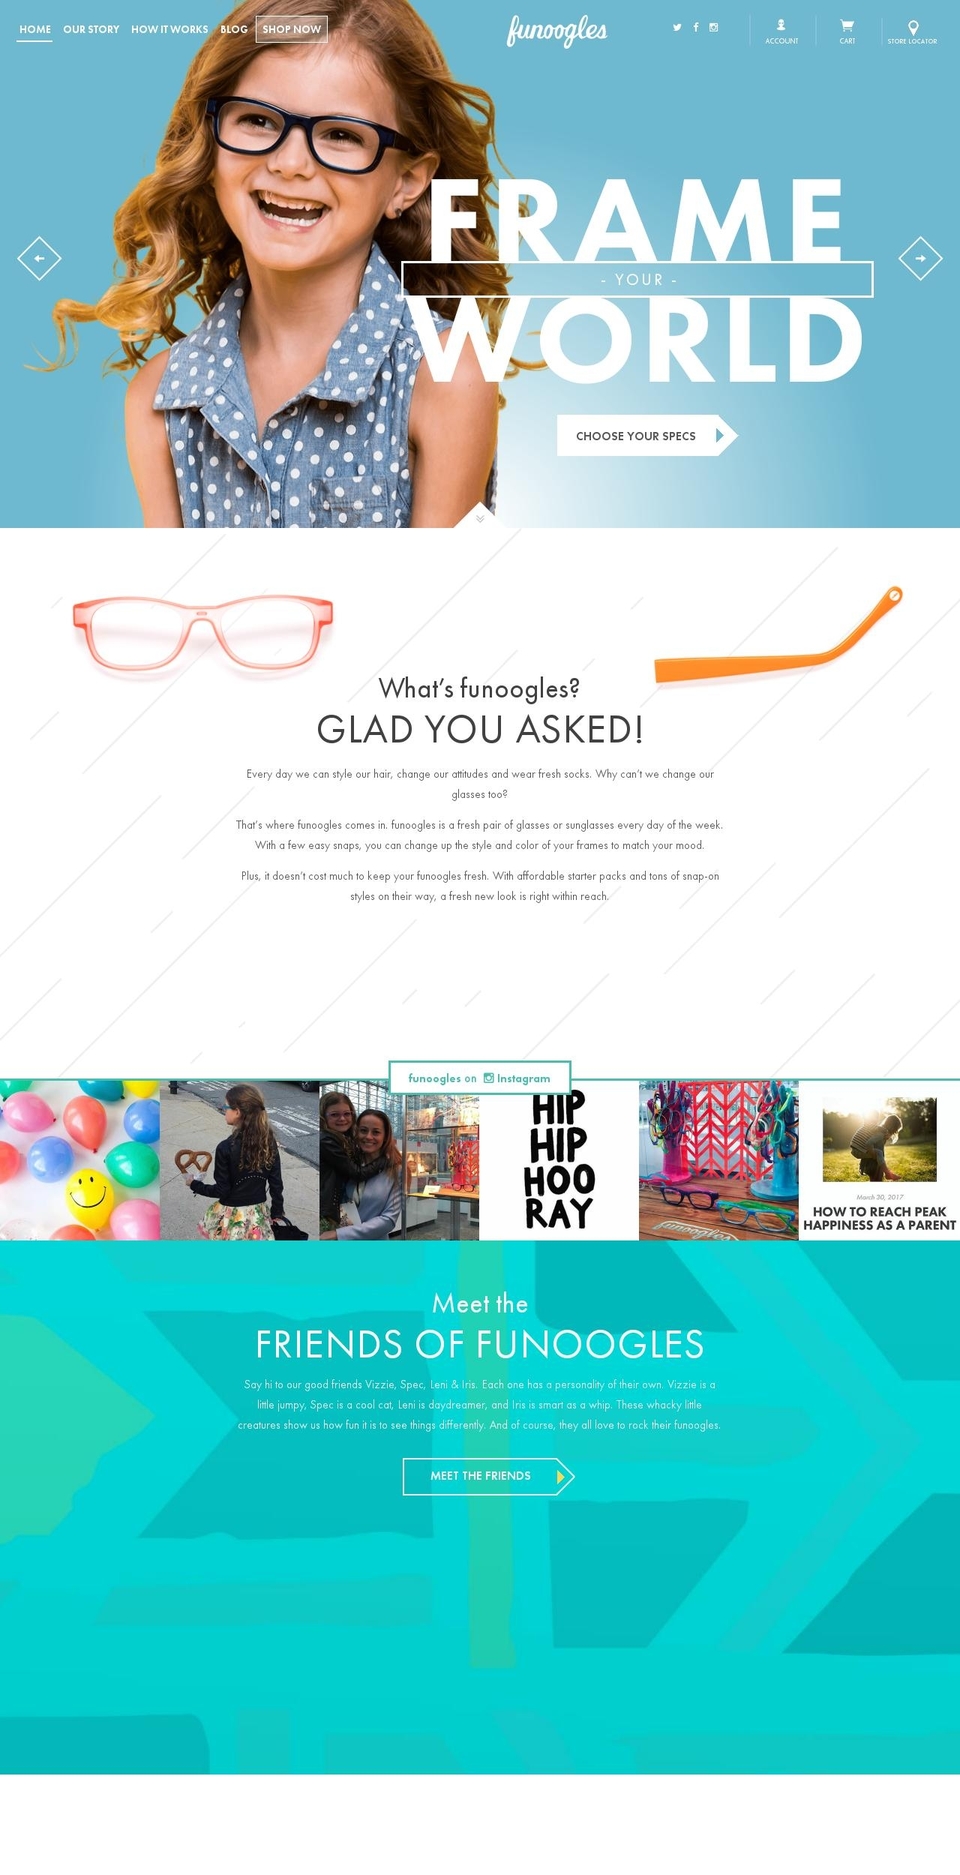 Uno Shopify theme site example funoogles.com